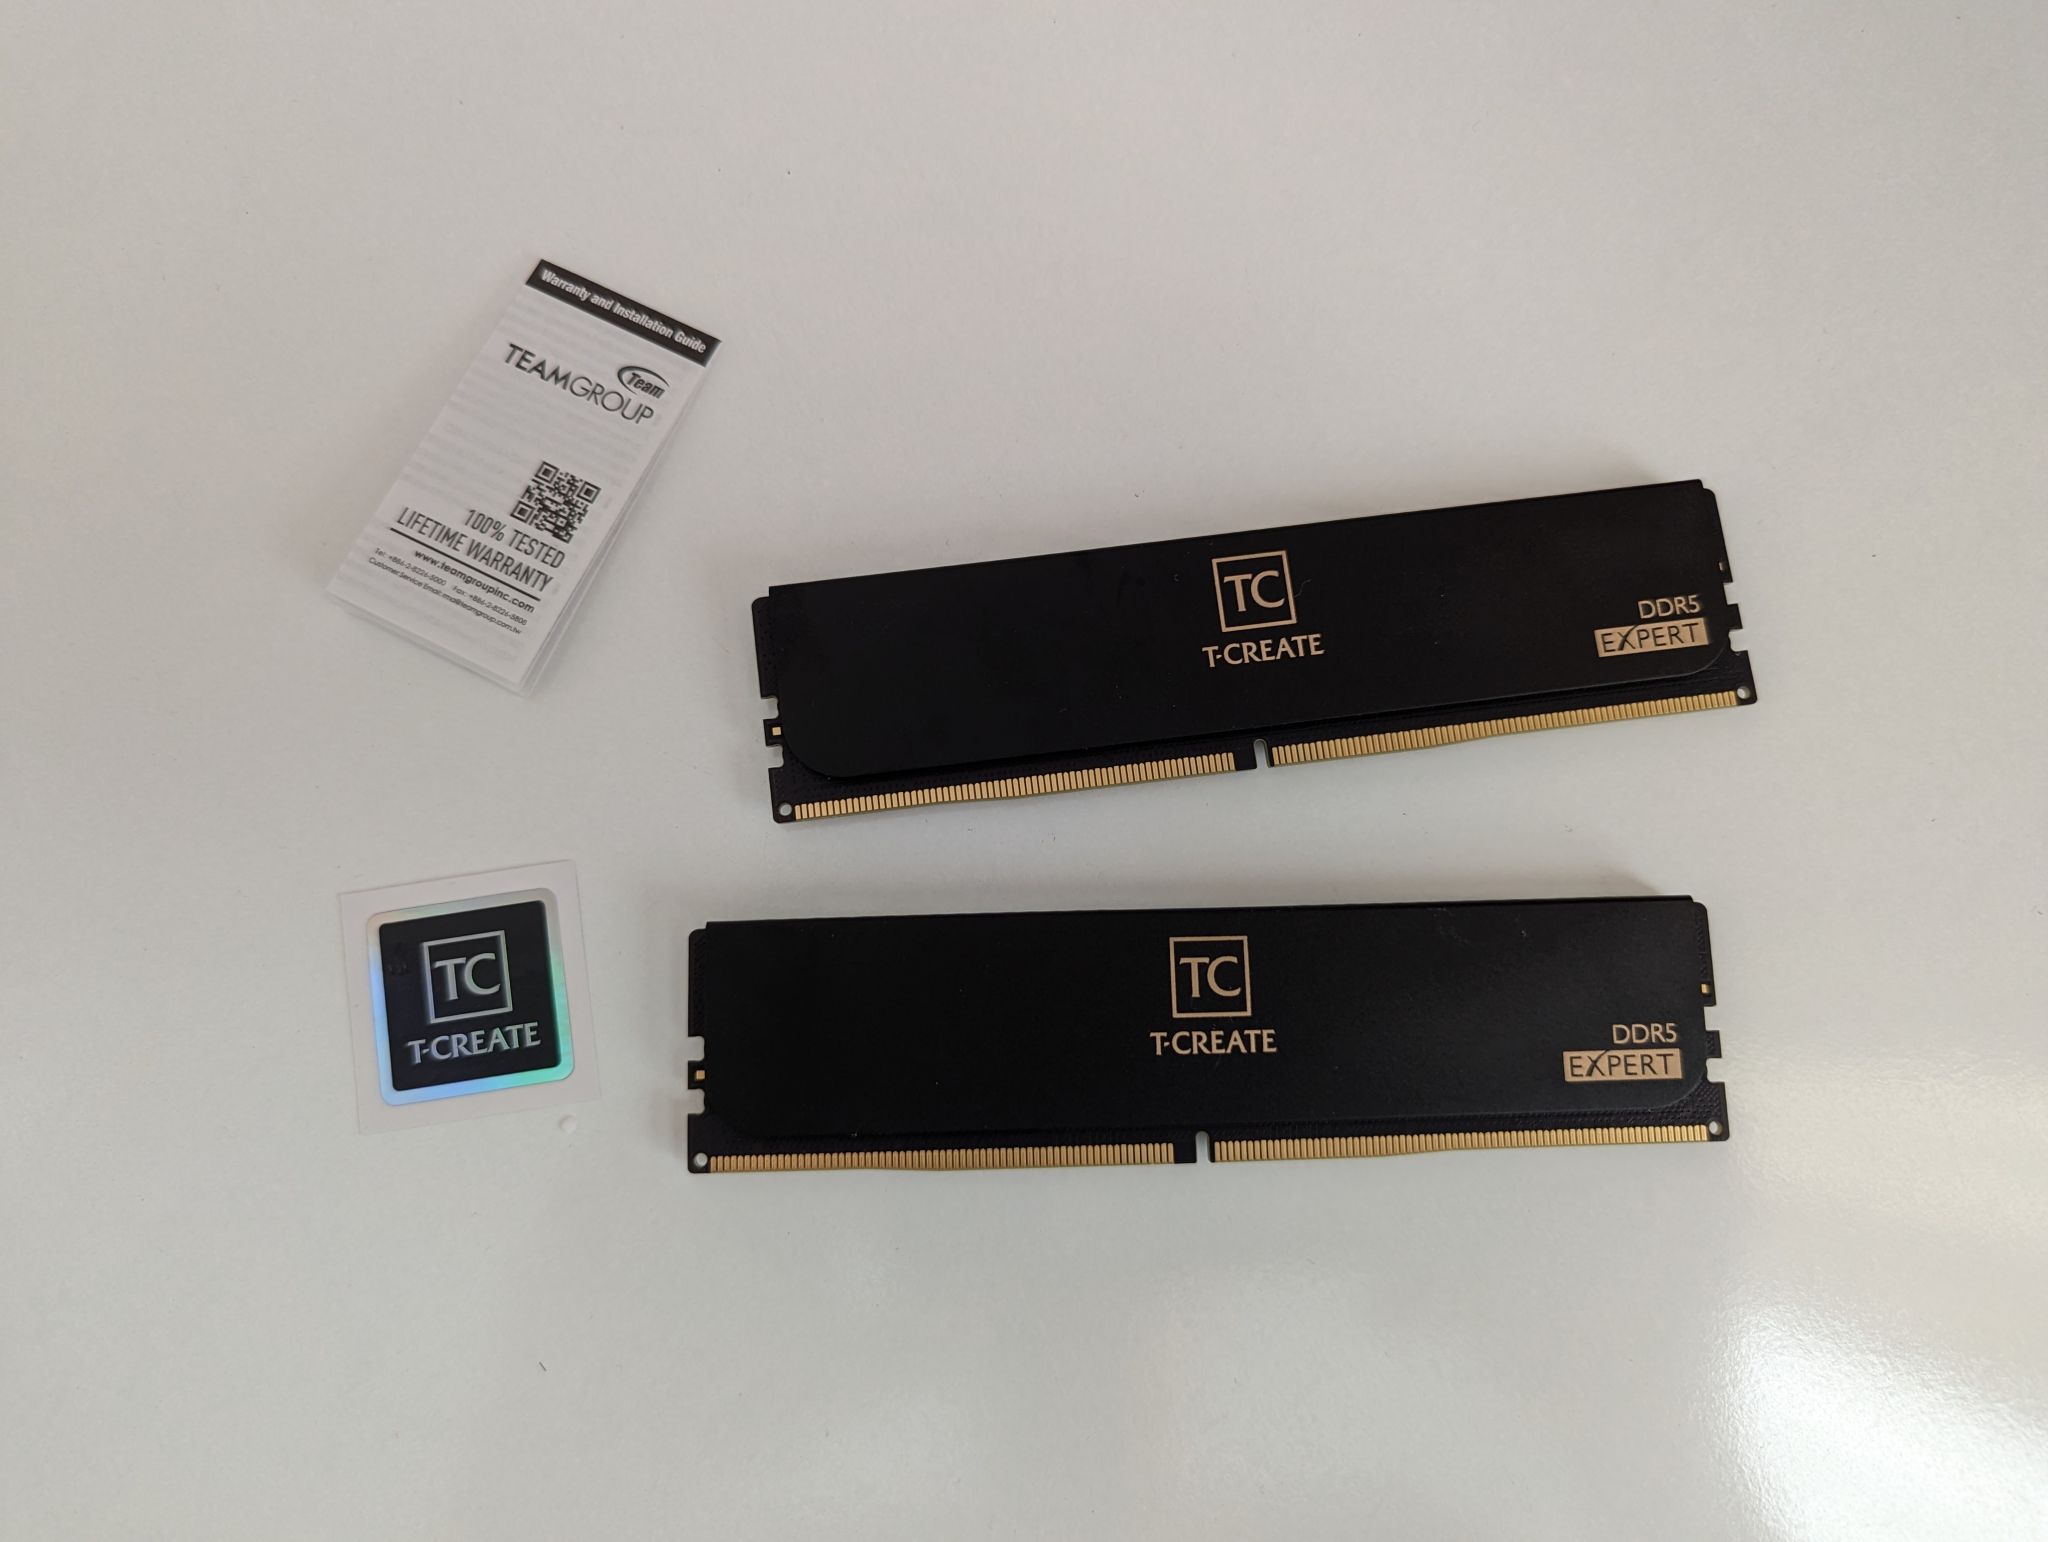 TEAMGROUP T-create Expert 32gb (2x16gb) 6000mhz cl30 (30-36-36-76) 1.35v Black (ctced532g6000hc30dc0). TEAMGROUP ddr5 32gb 6000mhz. Team Group t-create Expert ddr5 6000mhz c38 a-die. Team group ddr5 2x16gb 6000mhz